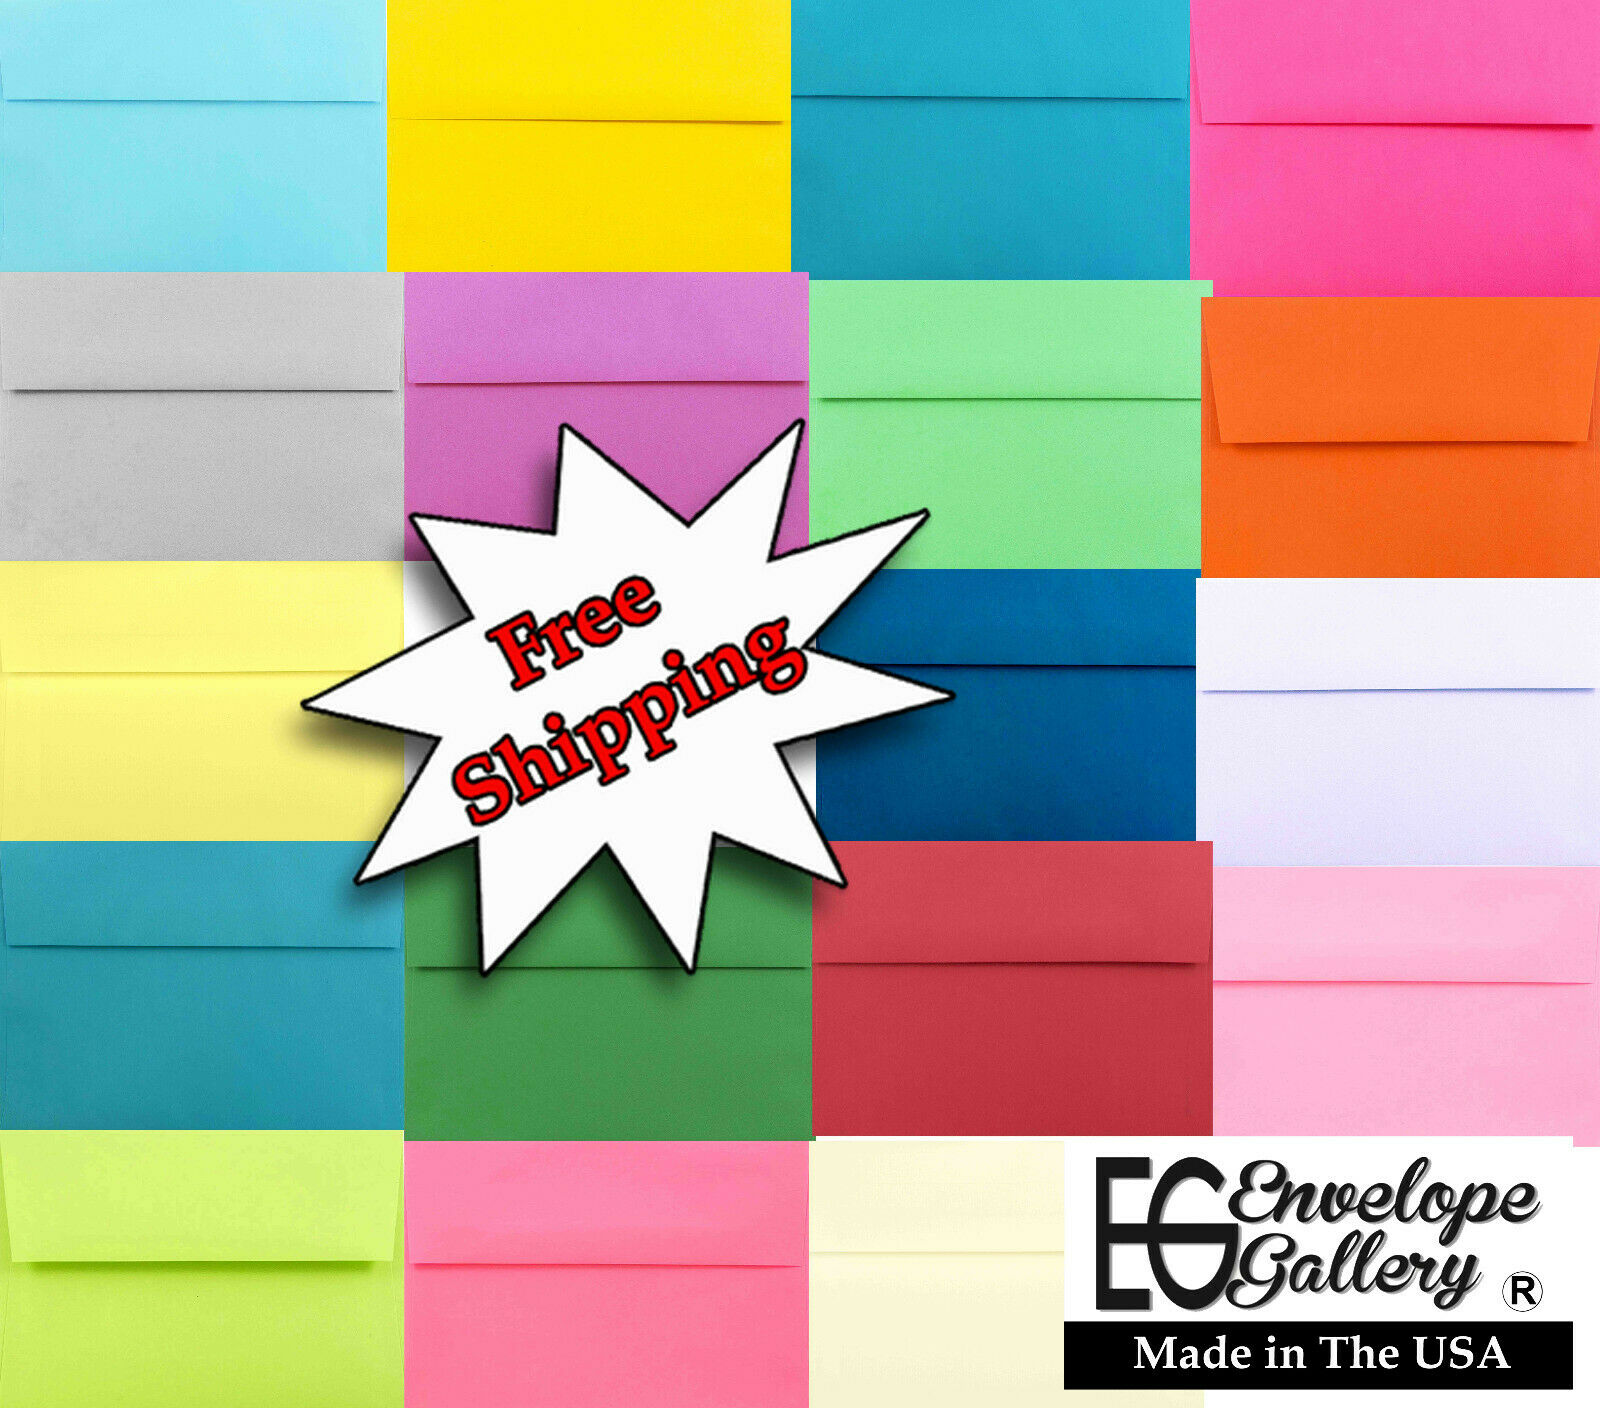 A7 Envelopes For 5 X 7 Announcements Shower Invitation Multi Assorted Or 1 Color